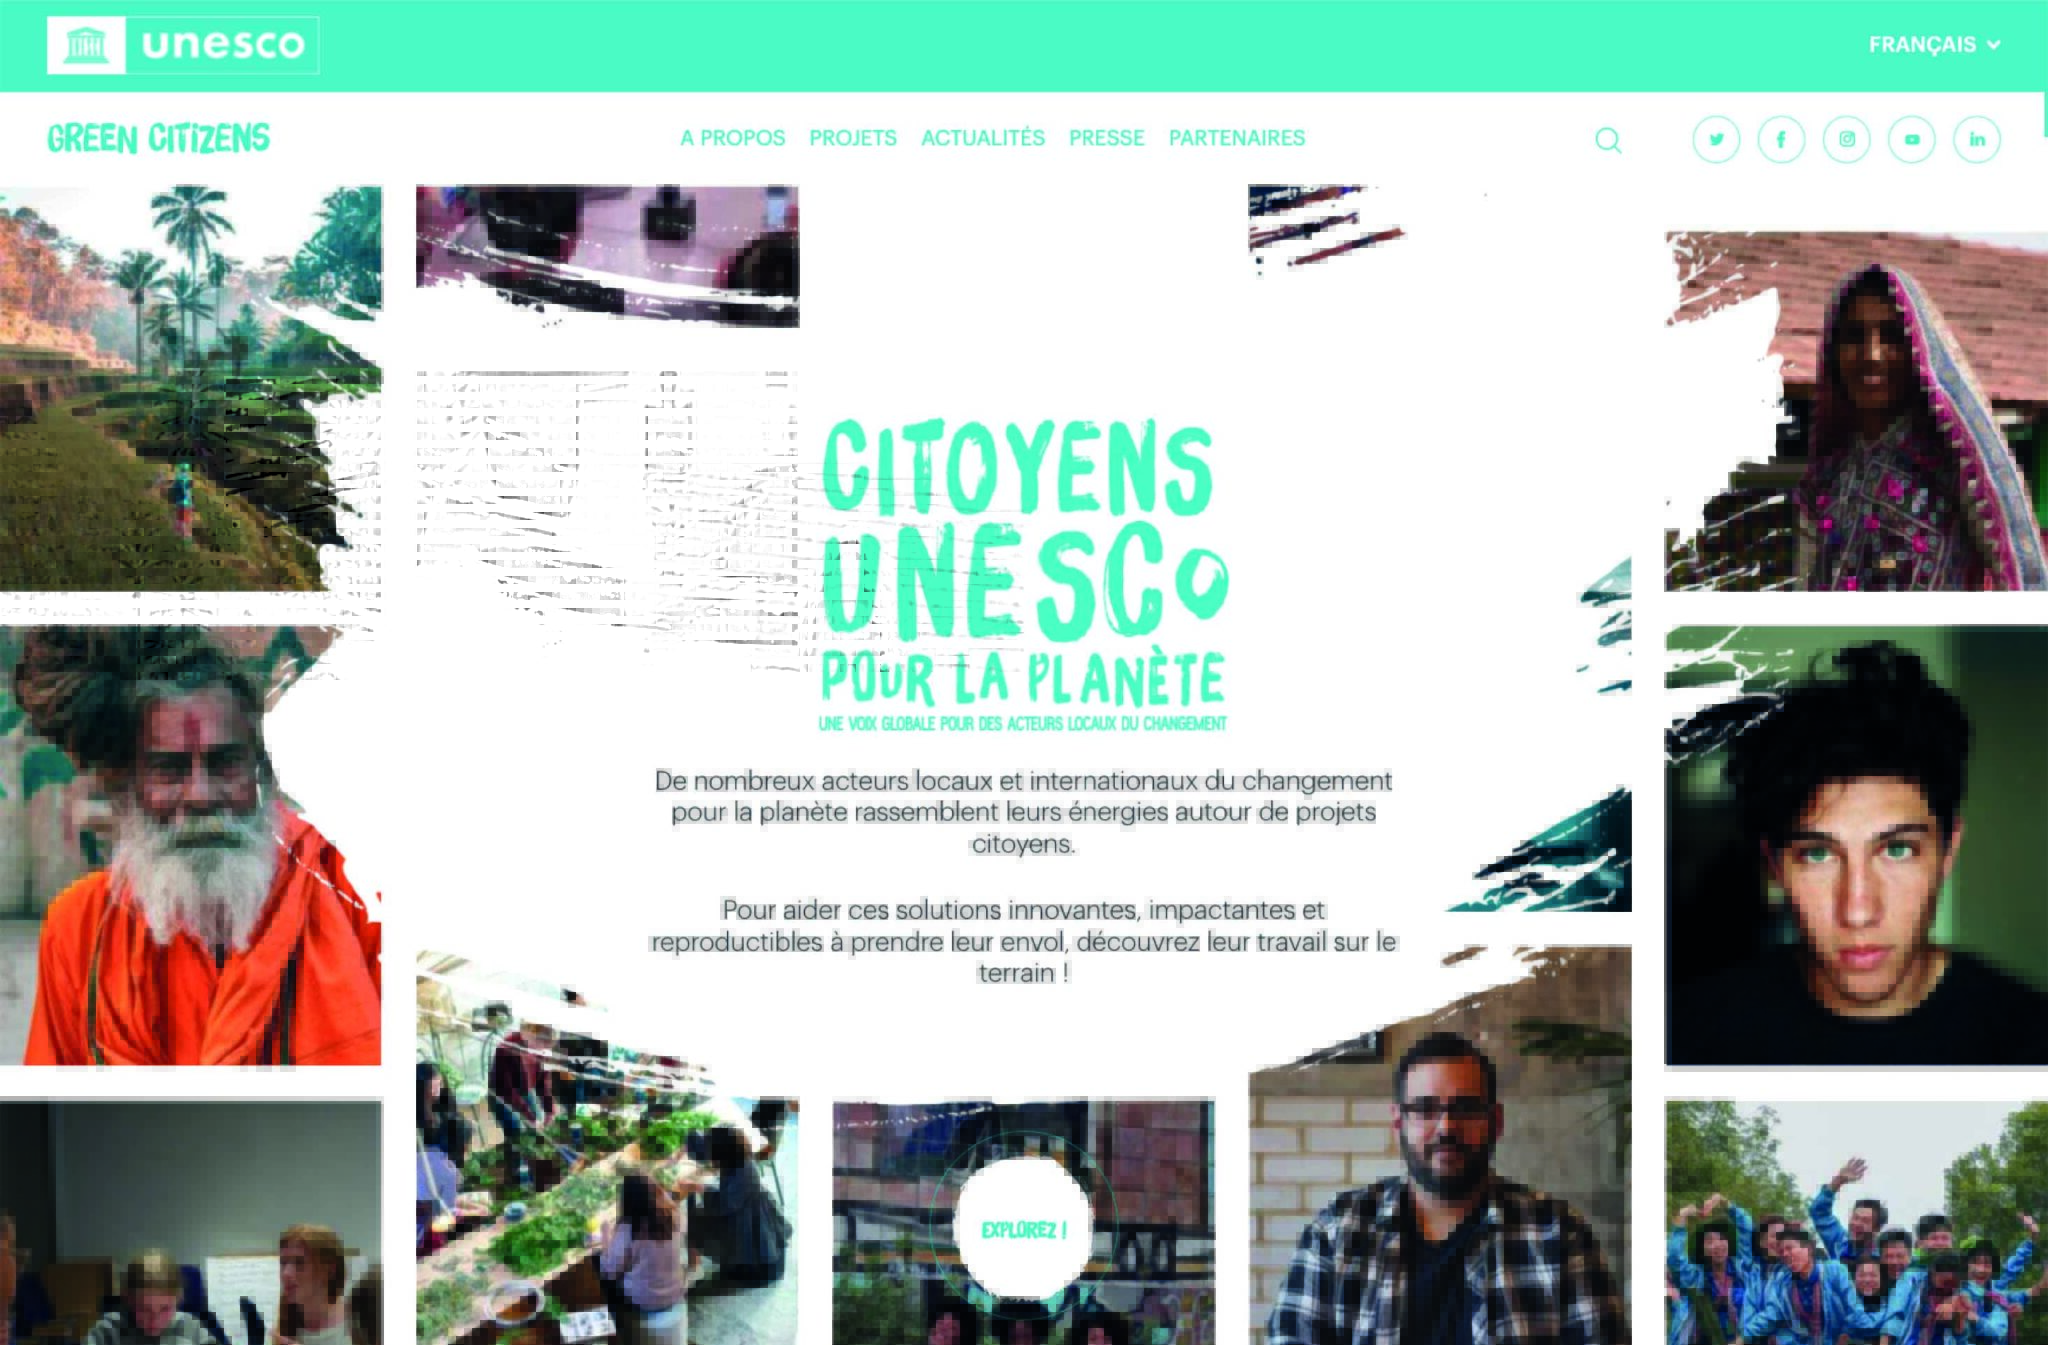 "Unesco Green Citizens": a collaborative platform to support citizen projects around the world